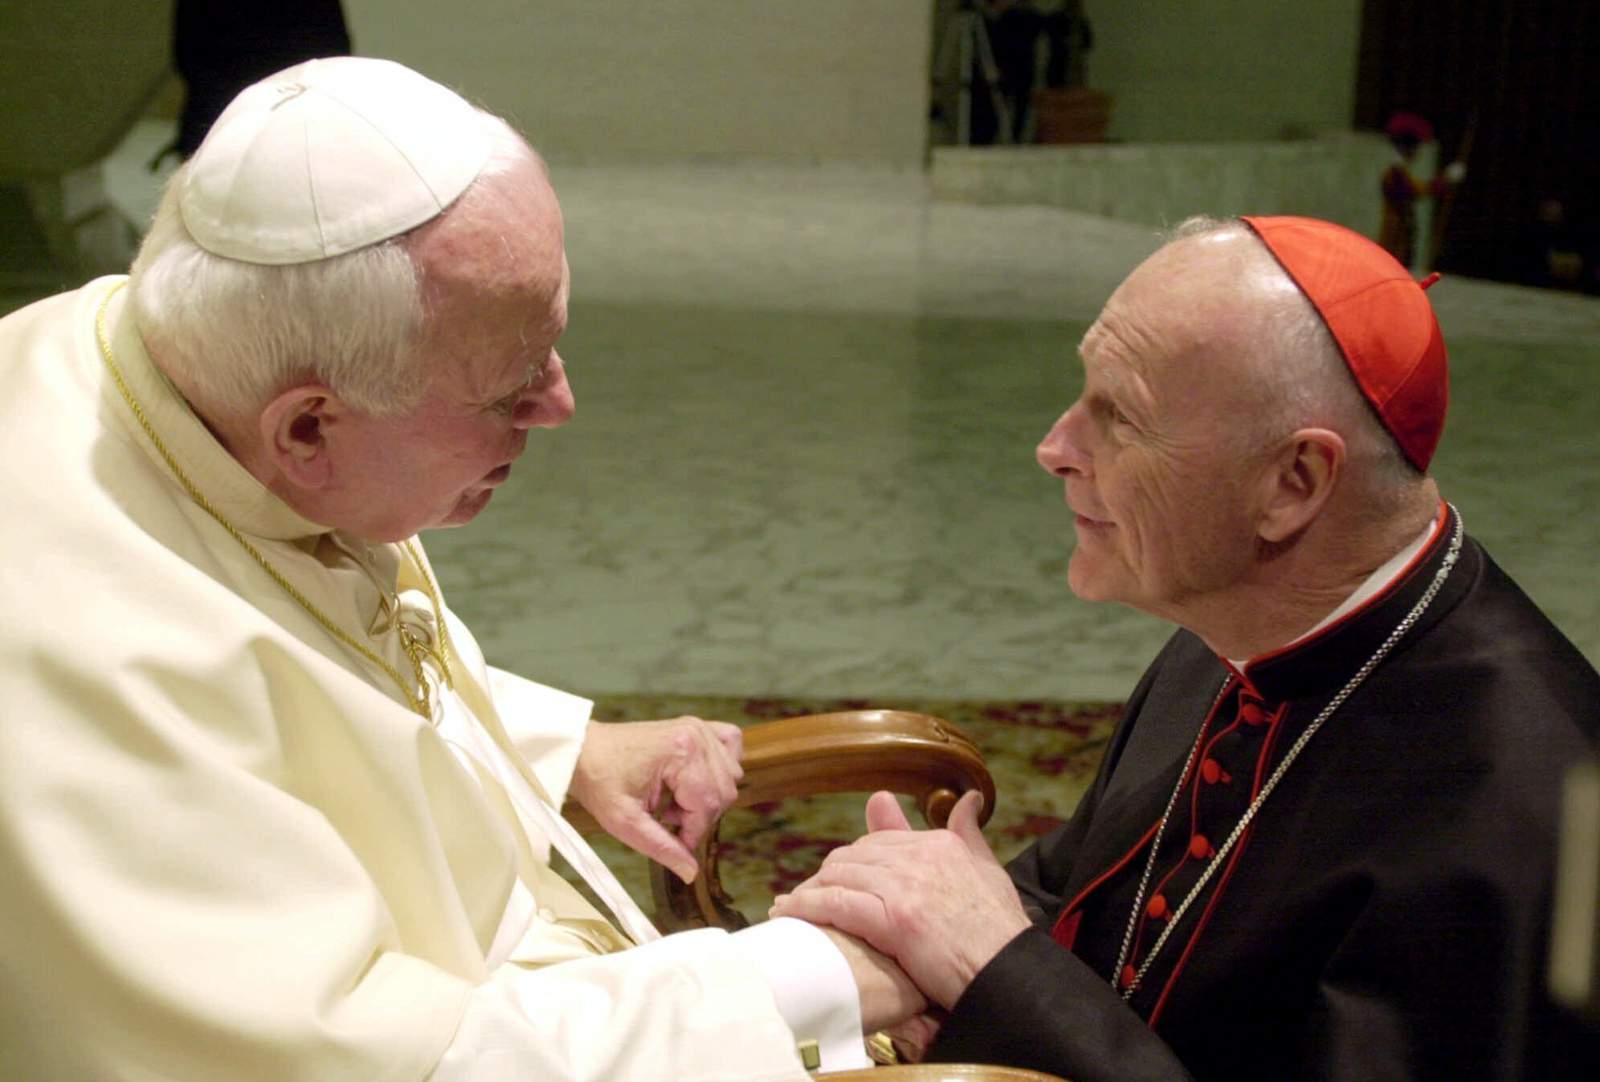 Vatican's McCarrick report forces debate on power and abuse